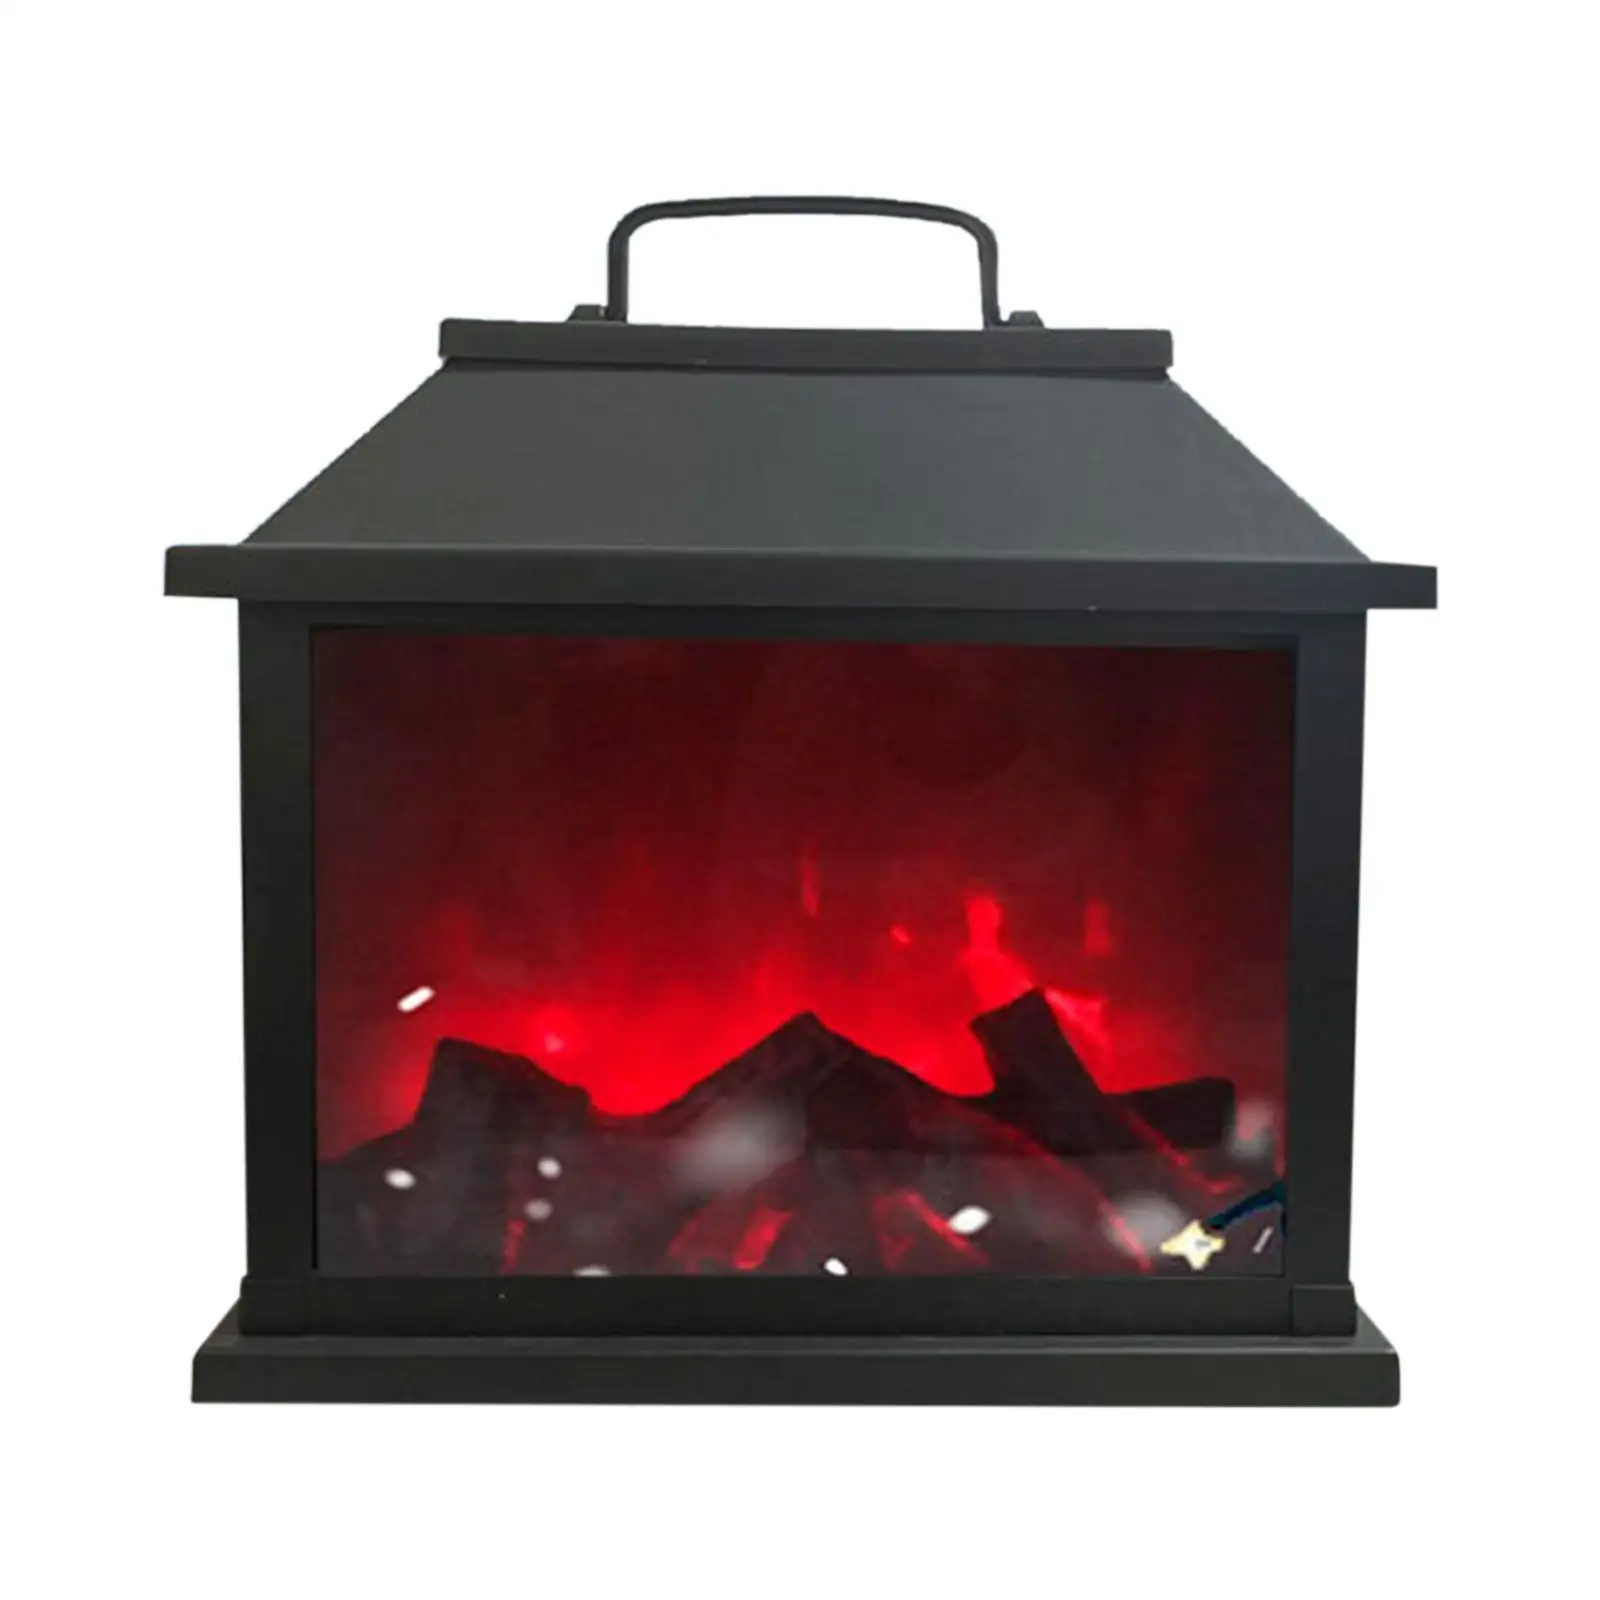 Fireplace Lantern Battery/USB Operated Decorative LED Fire Lamp Centerpiece Vintage Style Tabletop Lamp for Indoor & Outdoor Use